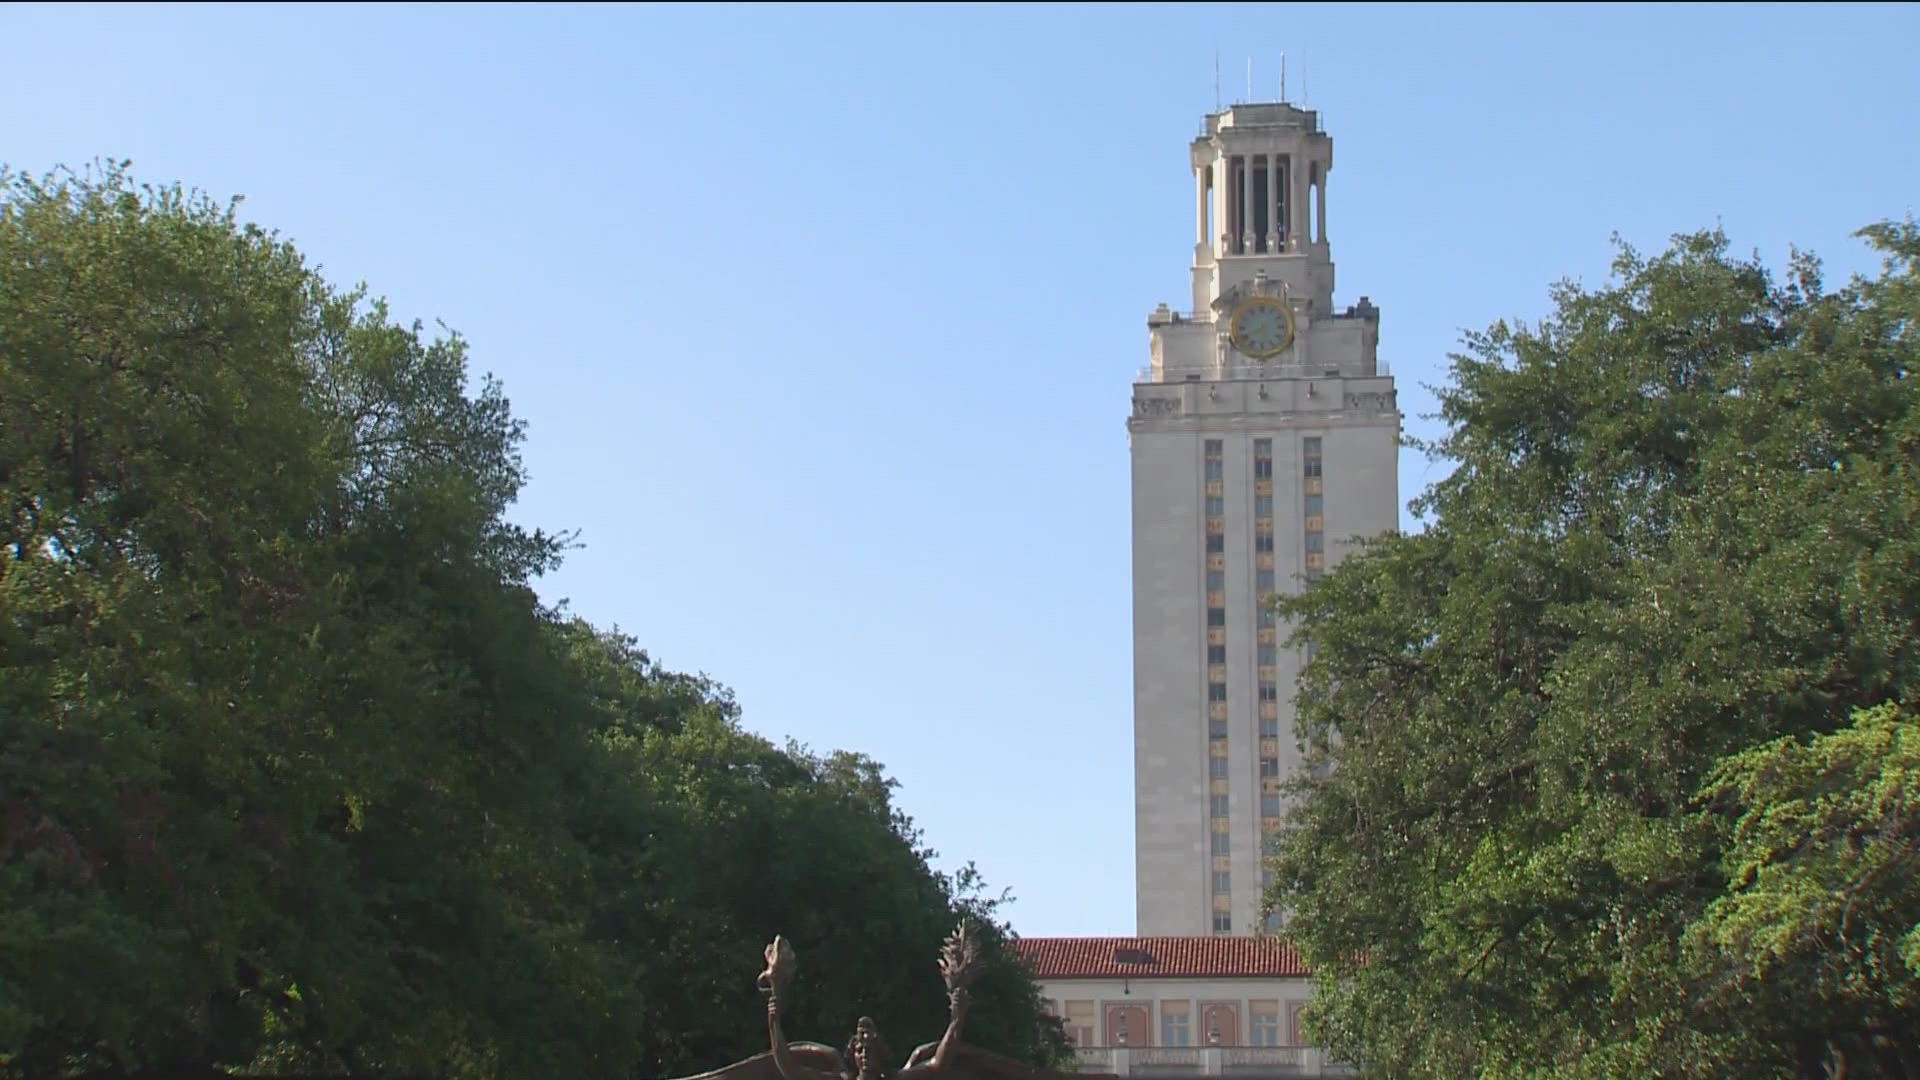 With more than 9,100 first-time freshmen students admitted, UT has hit an all-time high in student population. KVUE's Dominique Newland explains.